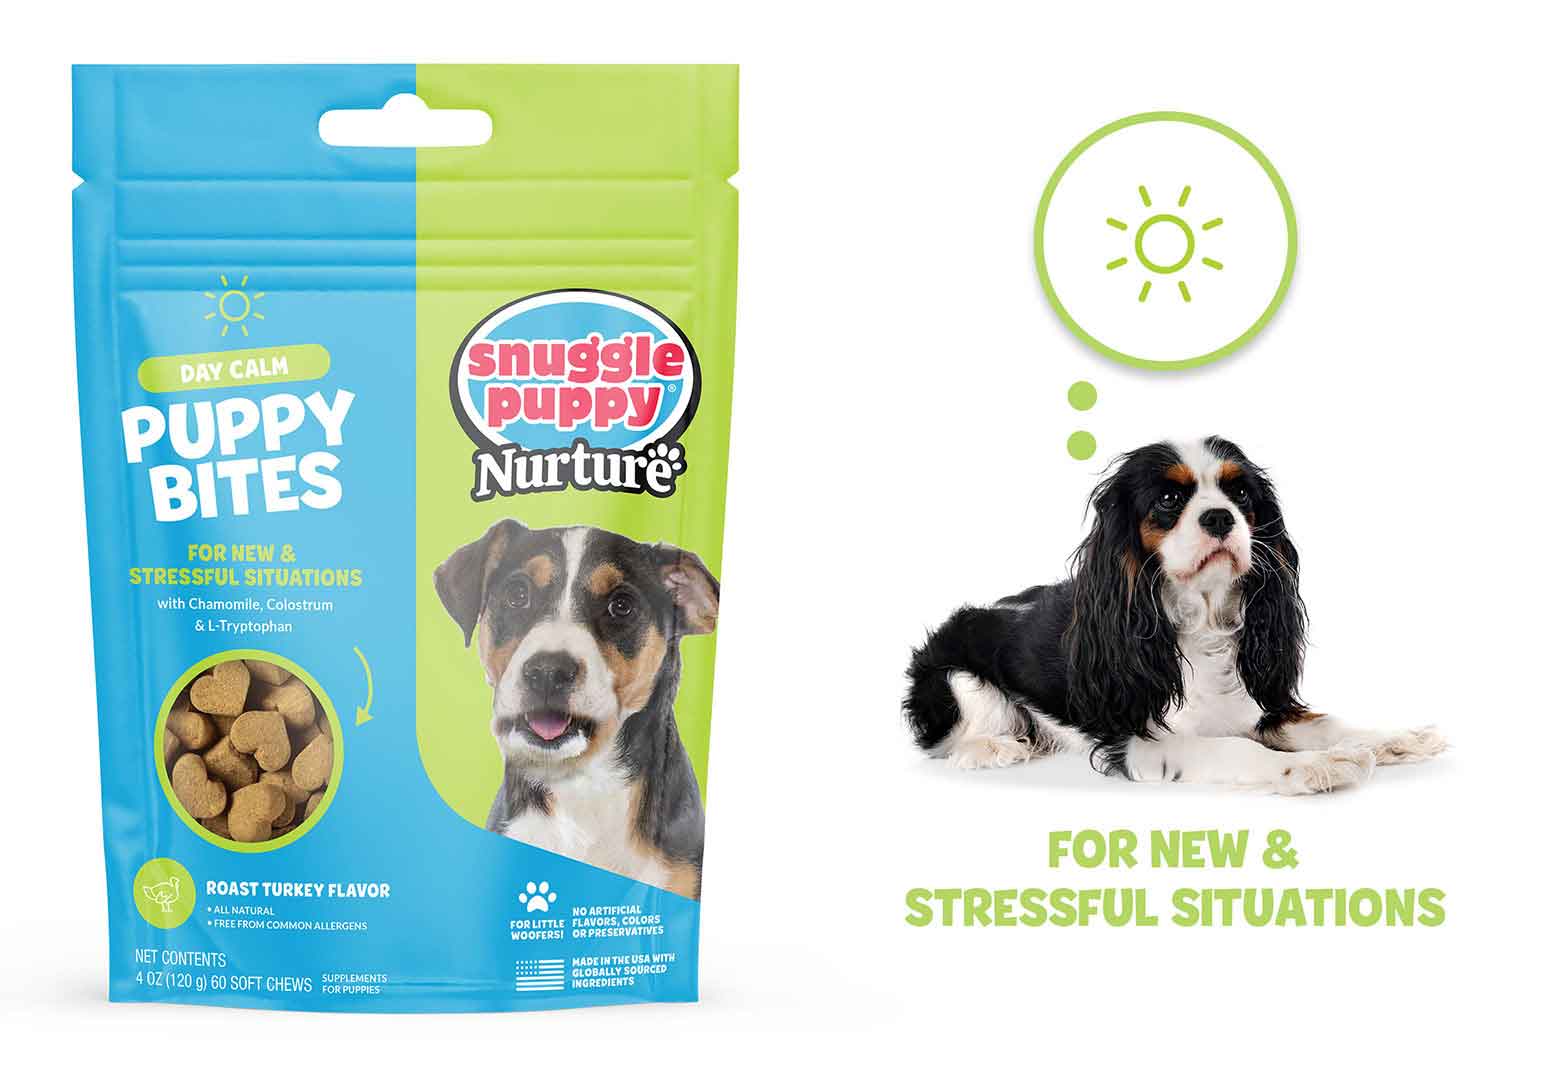 Puppy Bites Day Calm Supplement by Snuggle Puppy